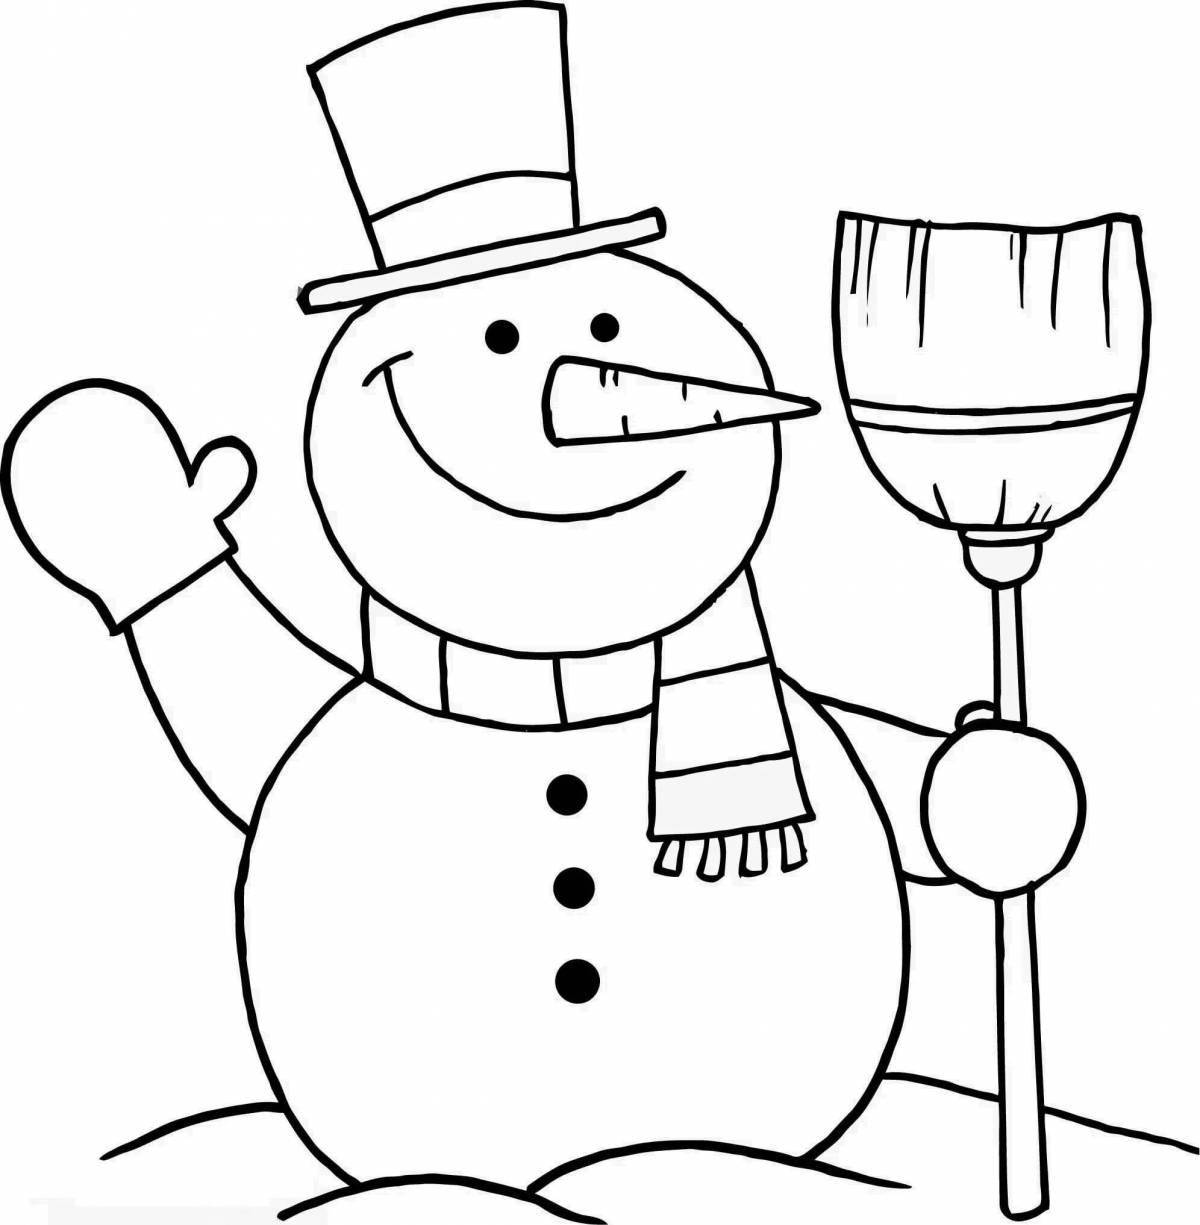 Glittering snowman coloring page